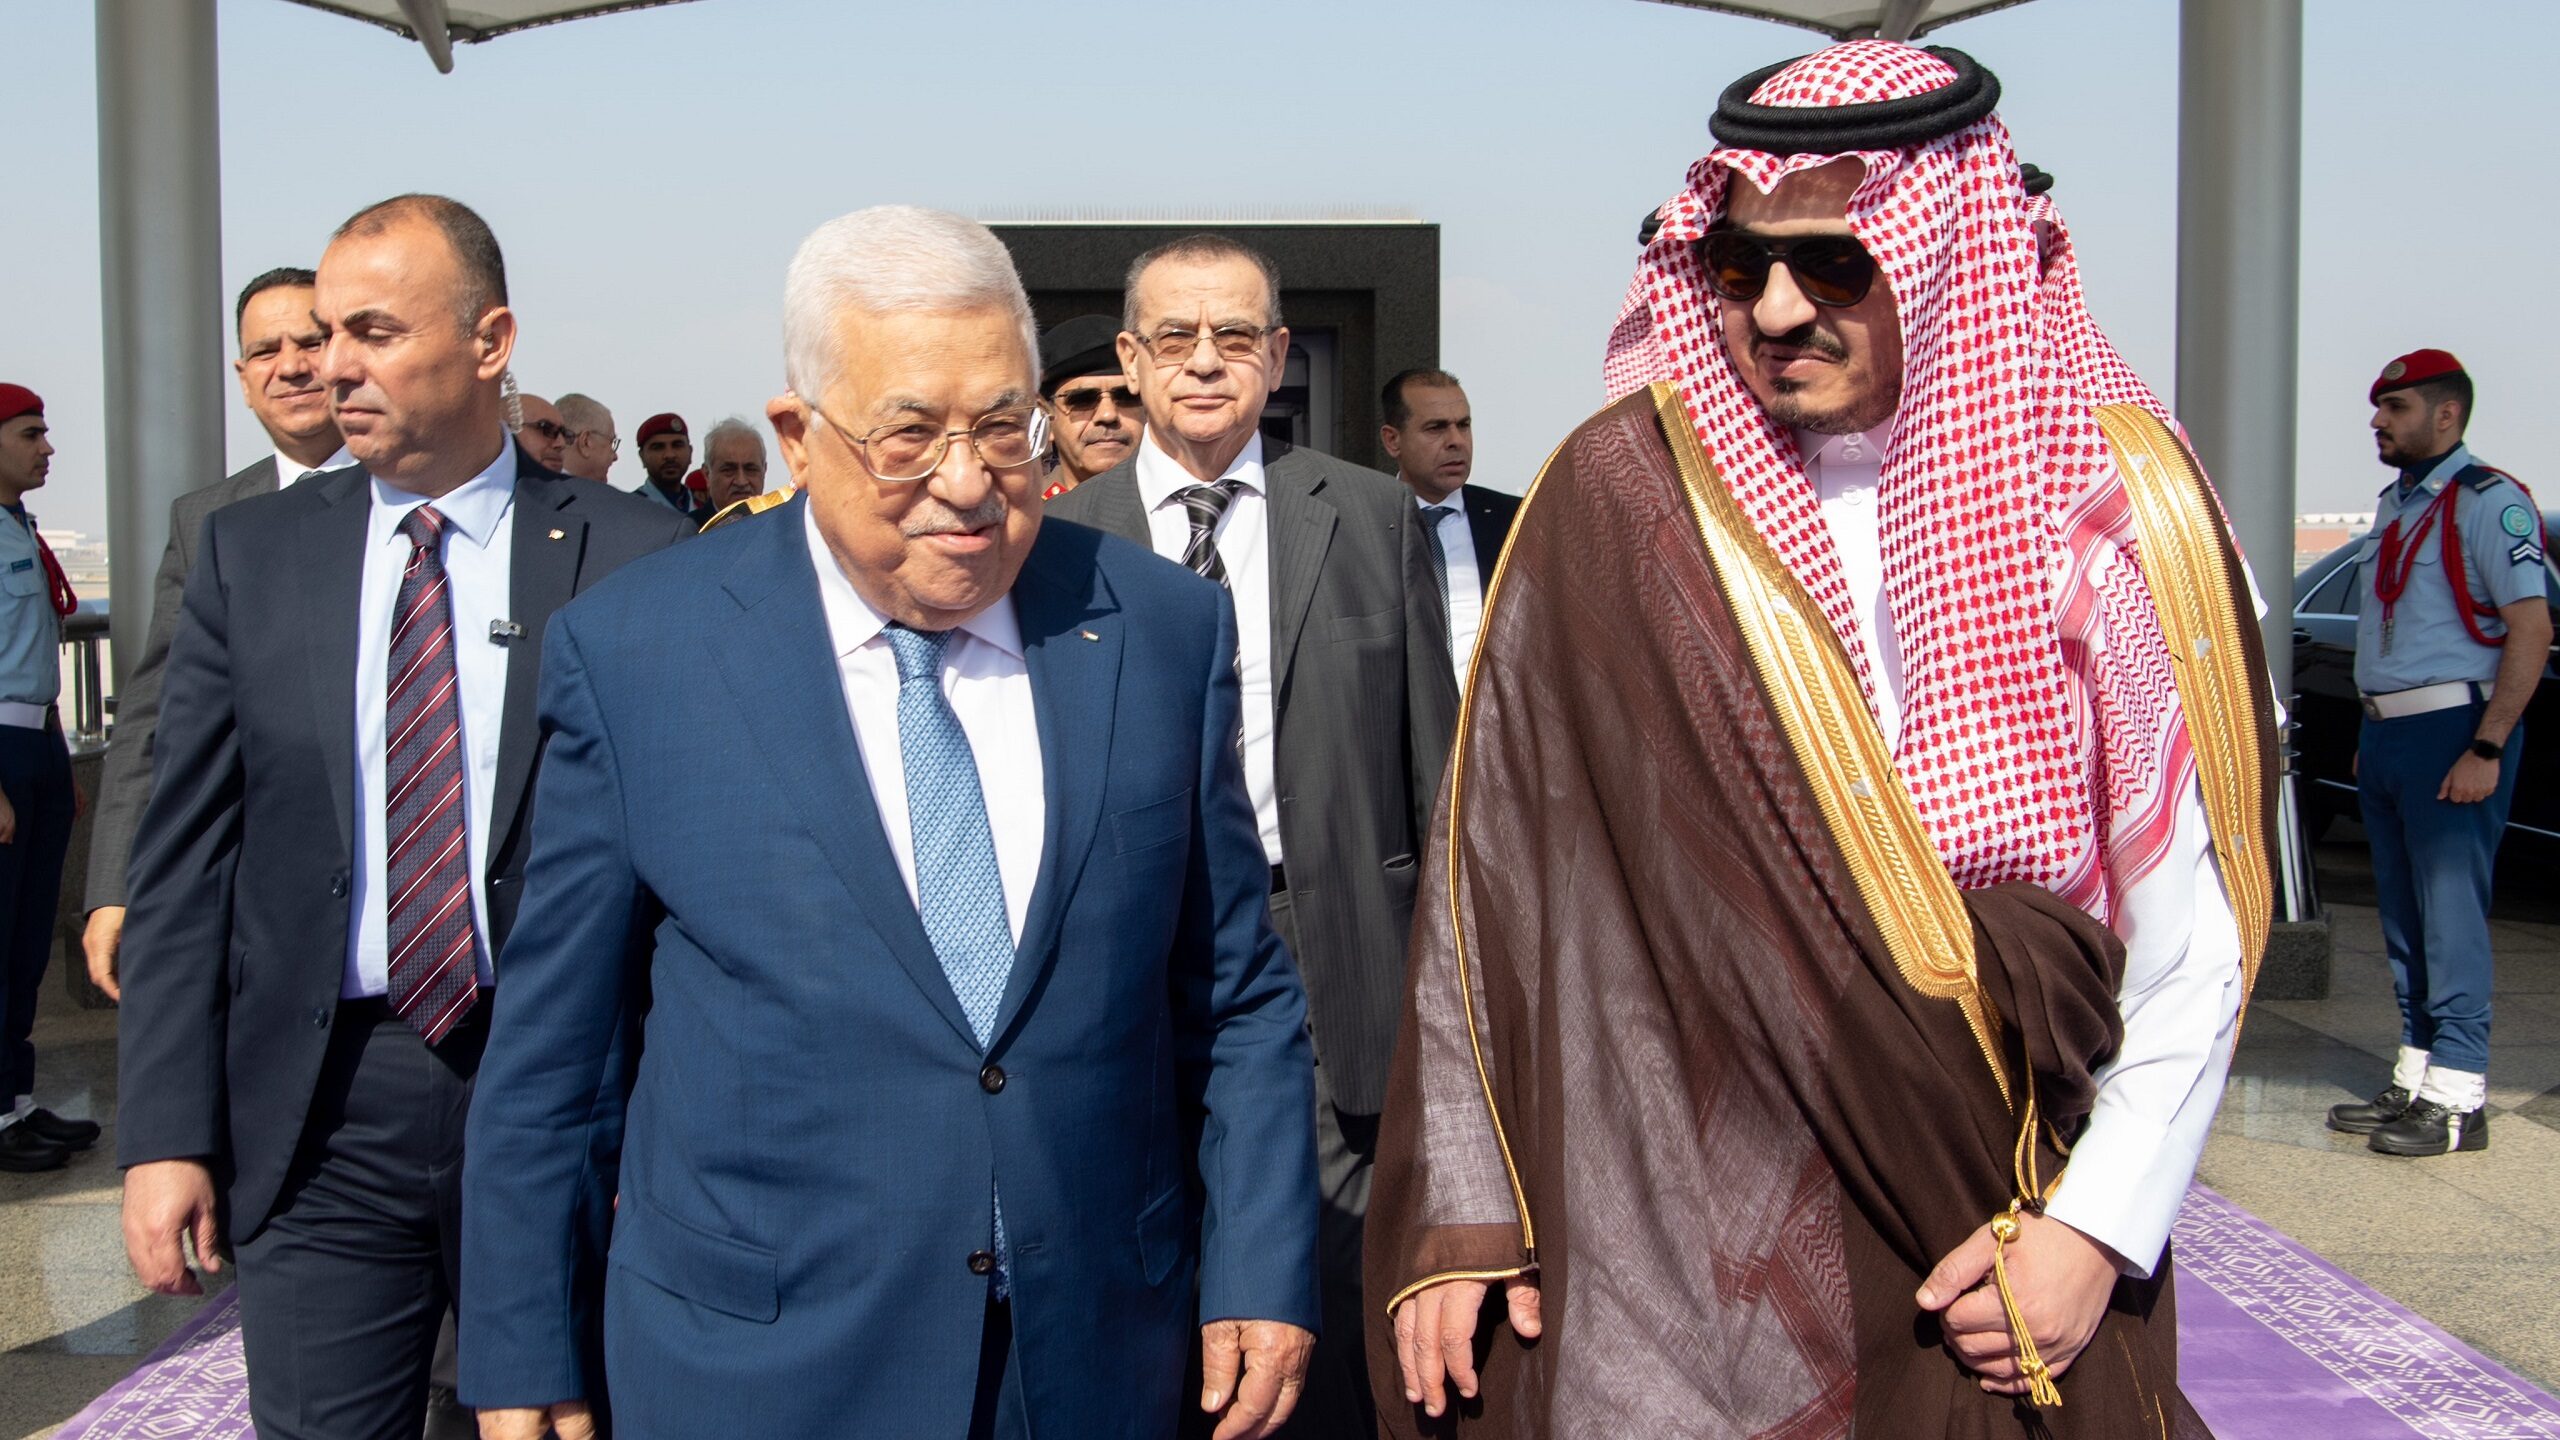 Saudi Alliances in Flux Amid Visits From PA President, Hamas Chiefs